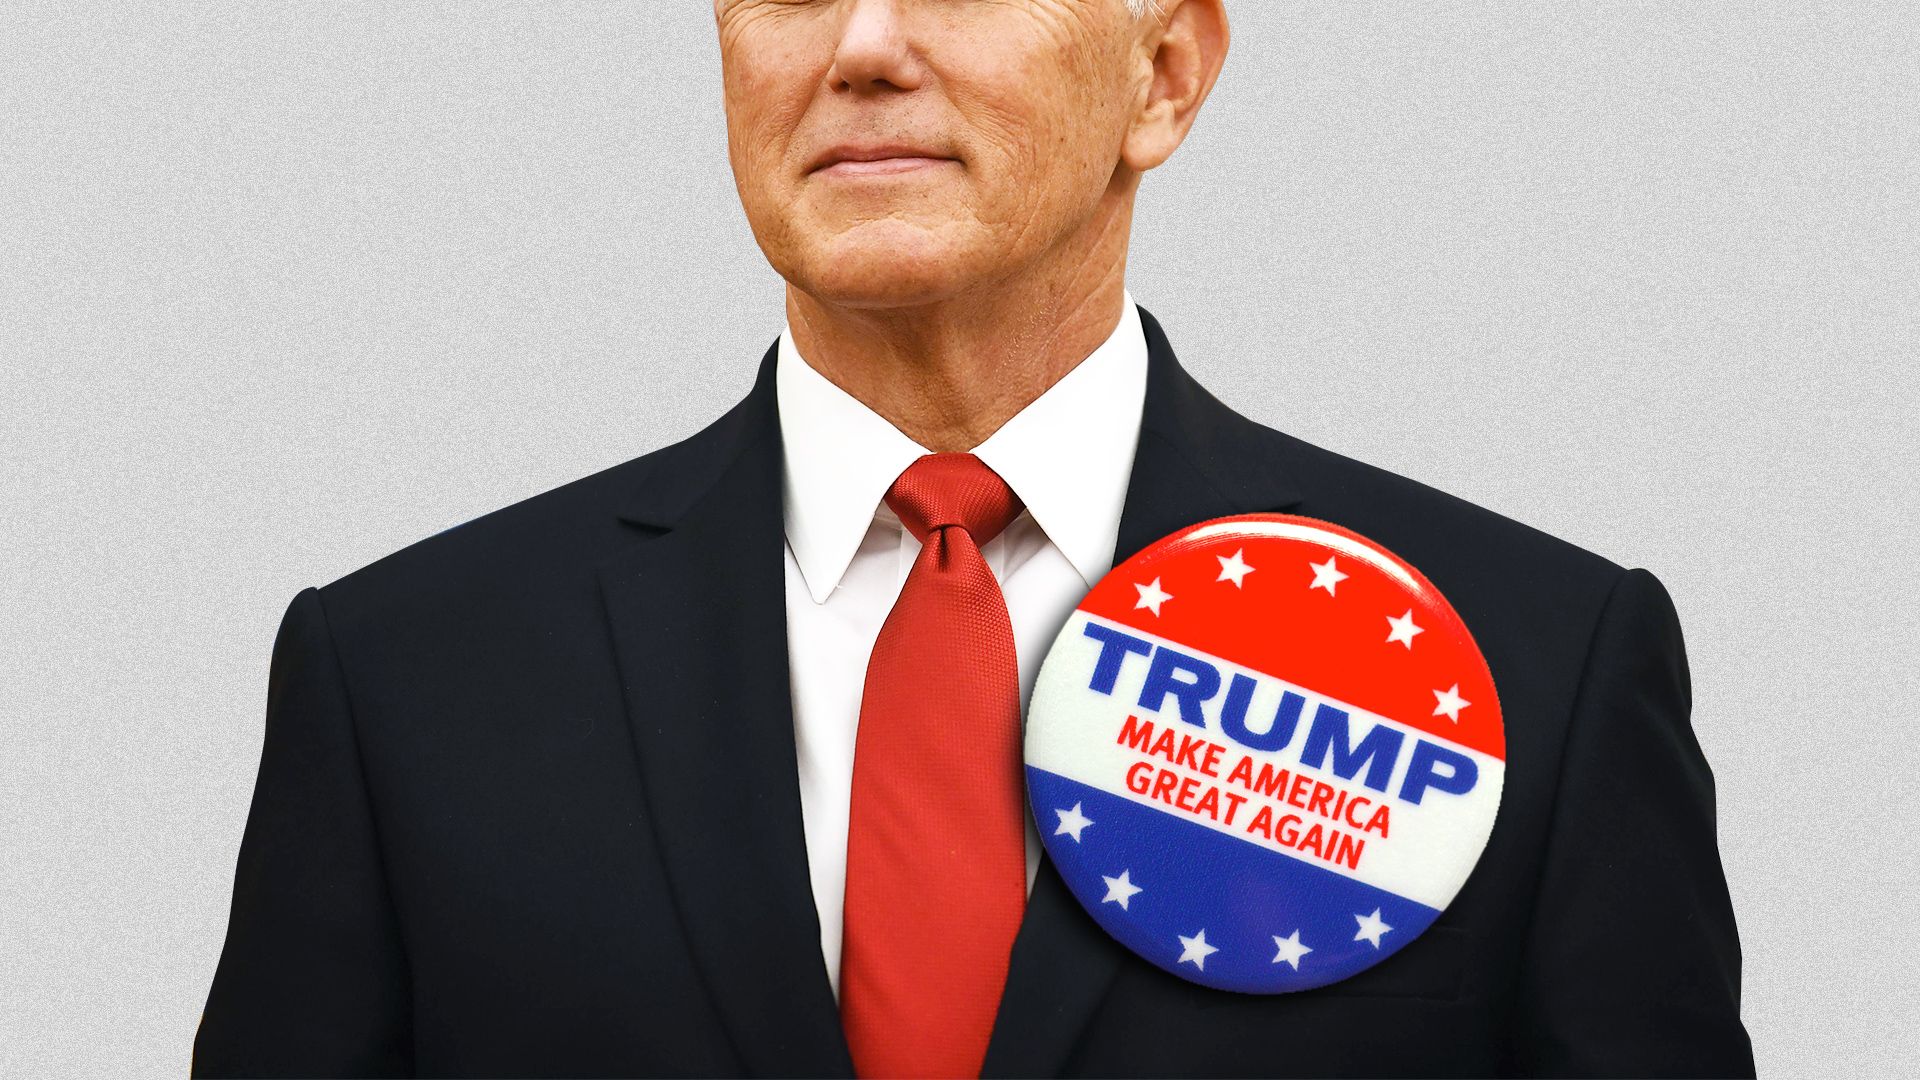 Illustration of Mike Pence with a larger very oversized Trump button on his lapel.